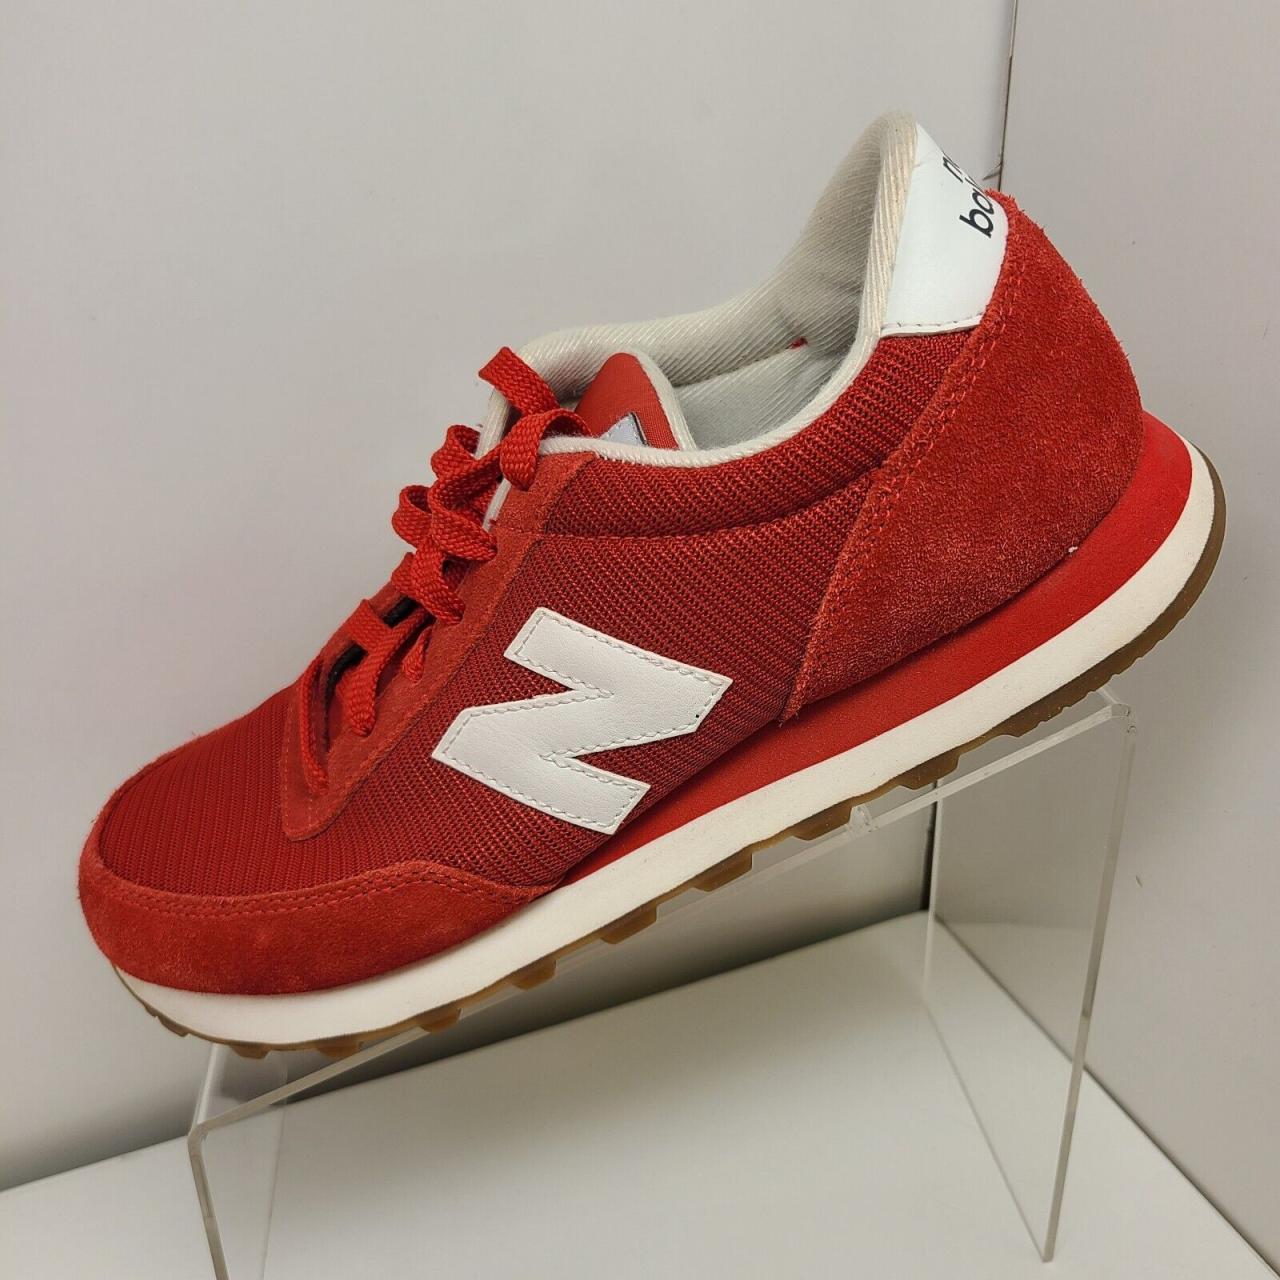 New Balance 501 Red Suede Sneakers Ml501Cvb Mens Size 8 | Ebay